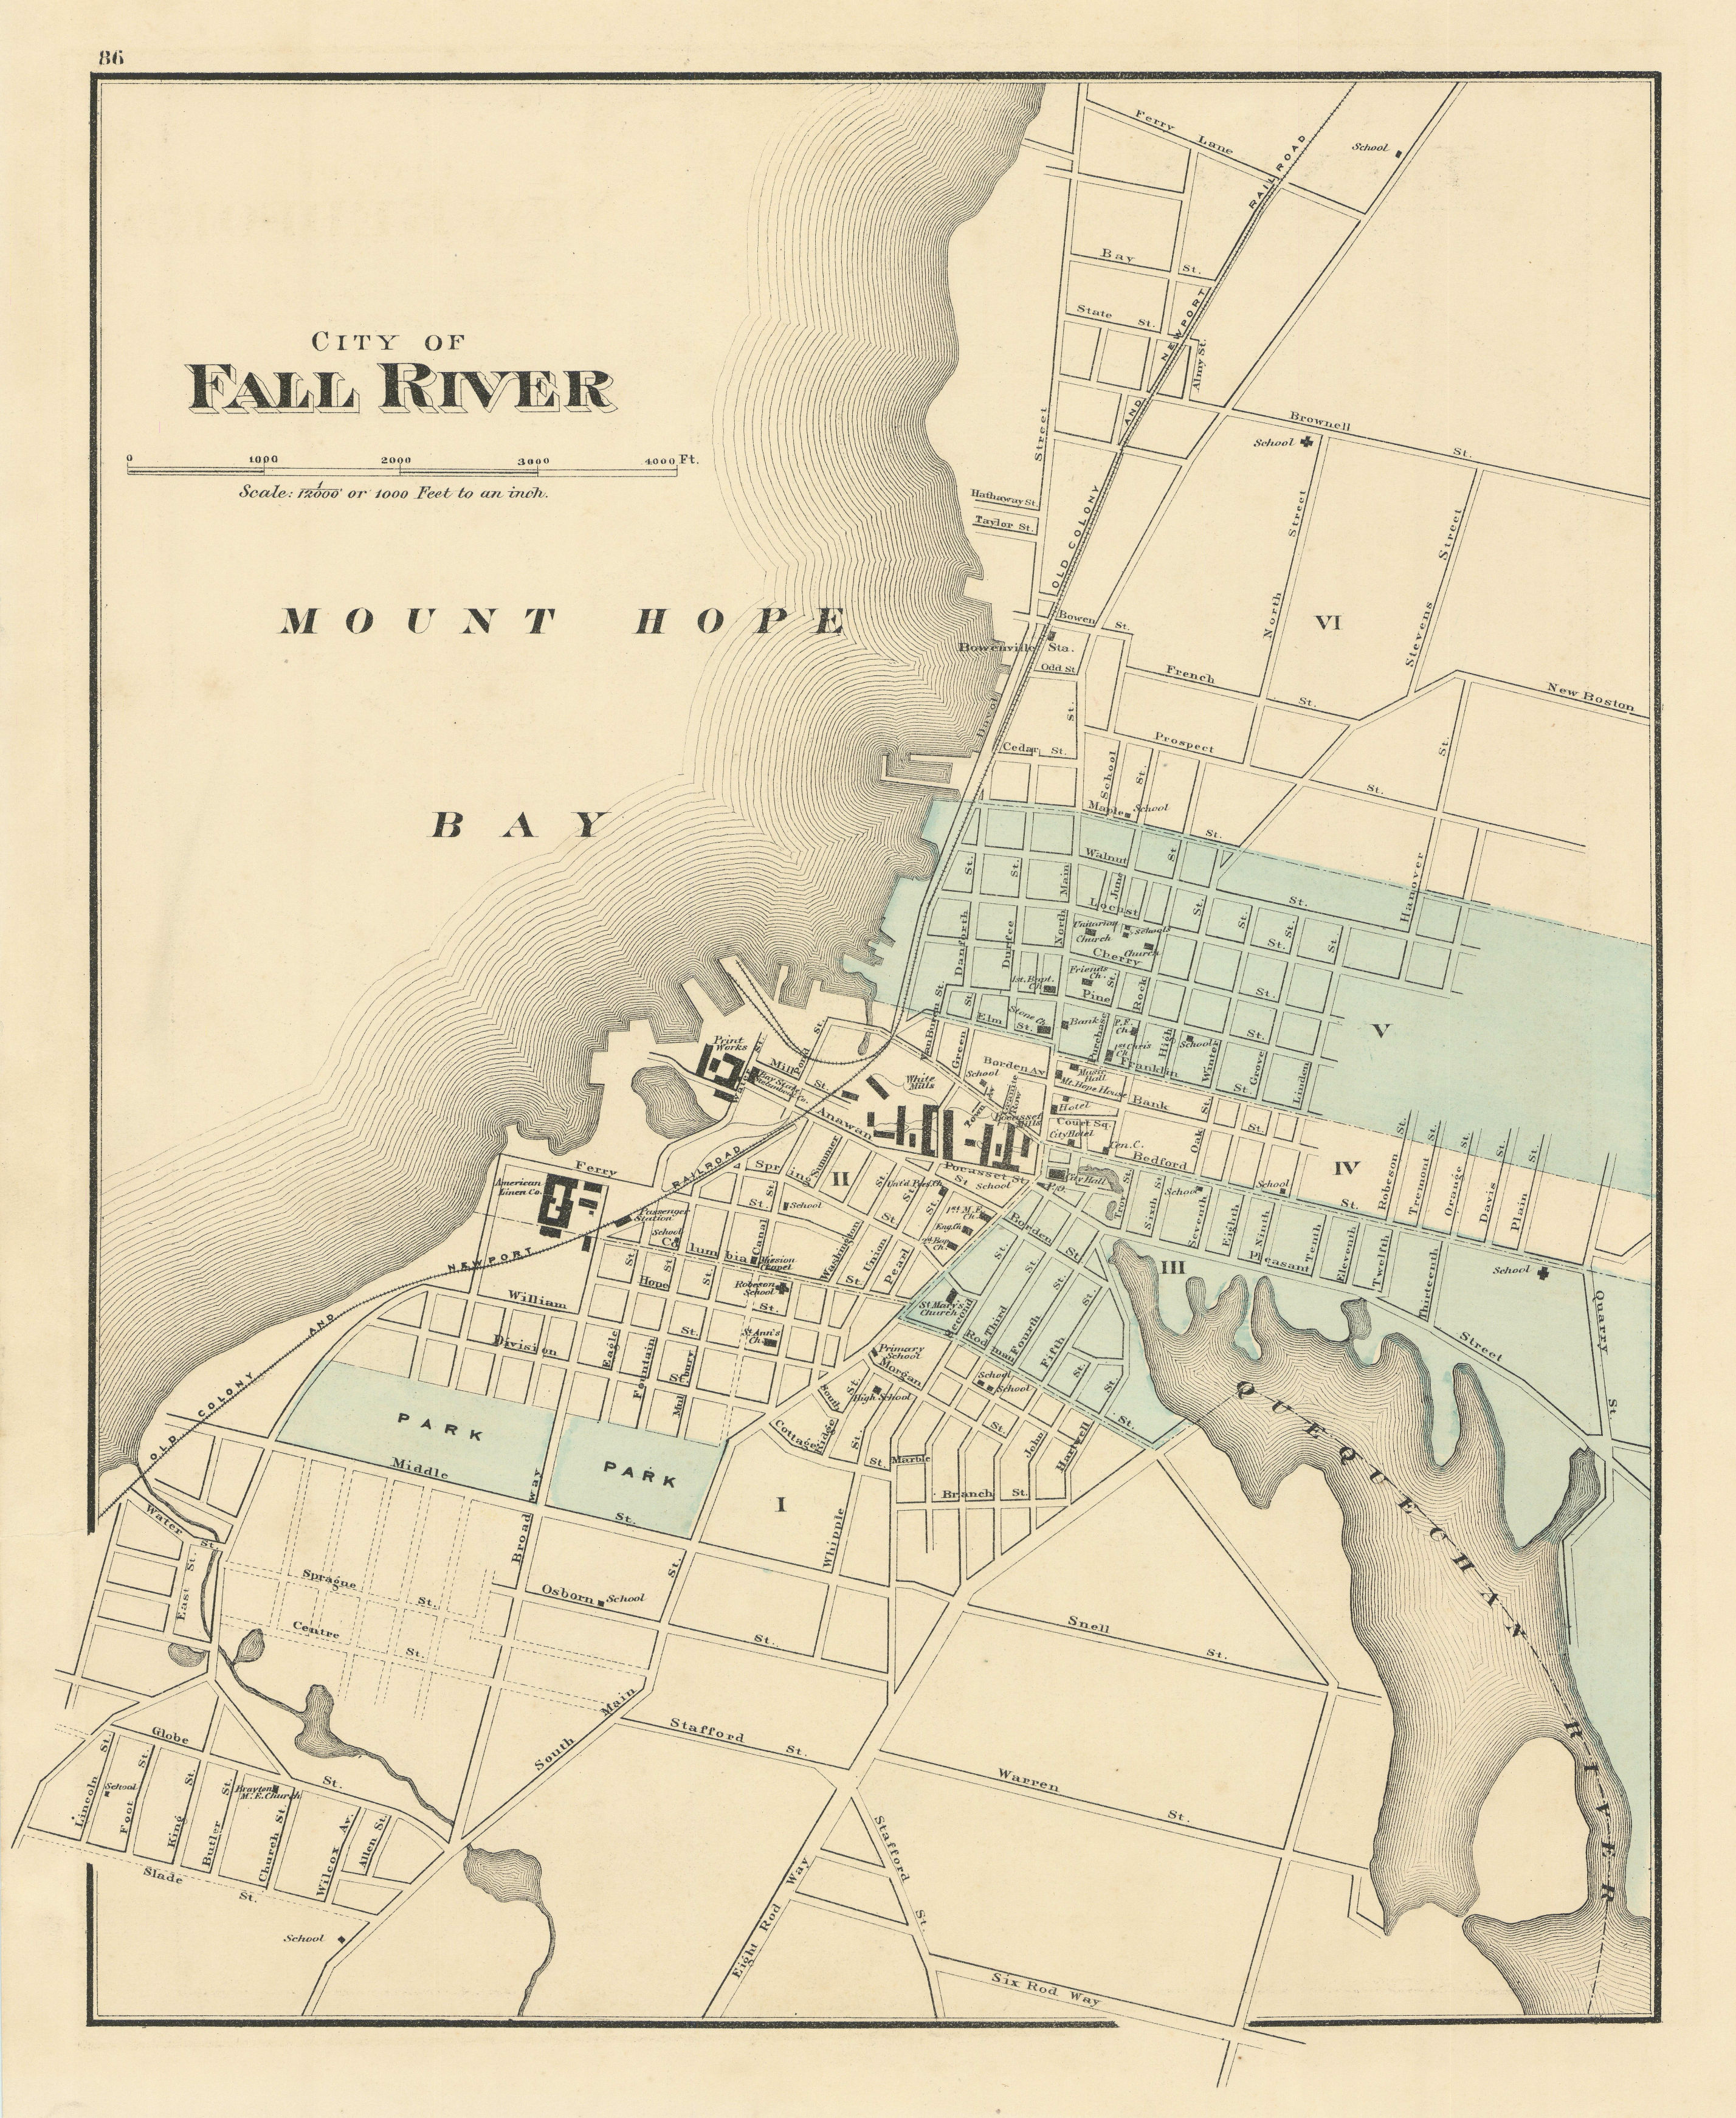 Associate Product City of Fall River, Massachusetts. Town plan. WALLING & GRAY 1871 old map